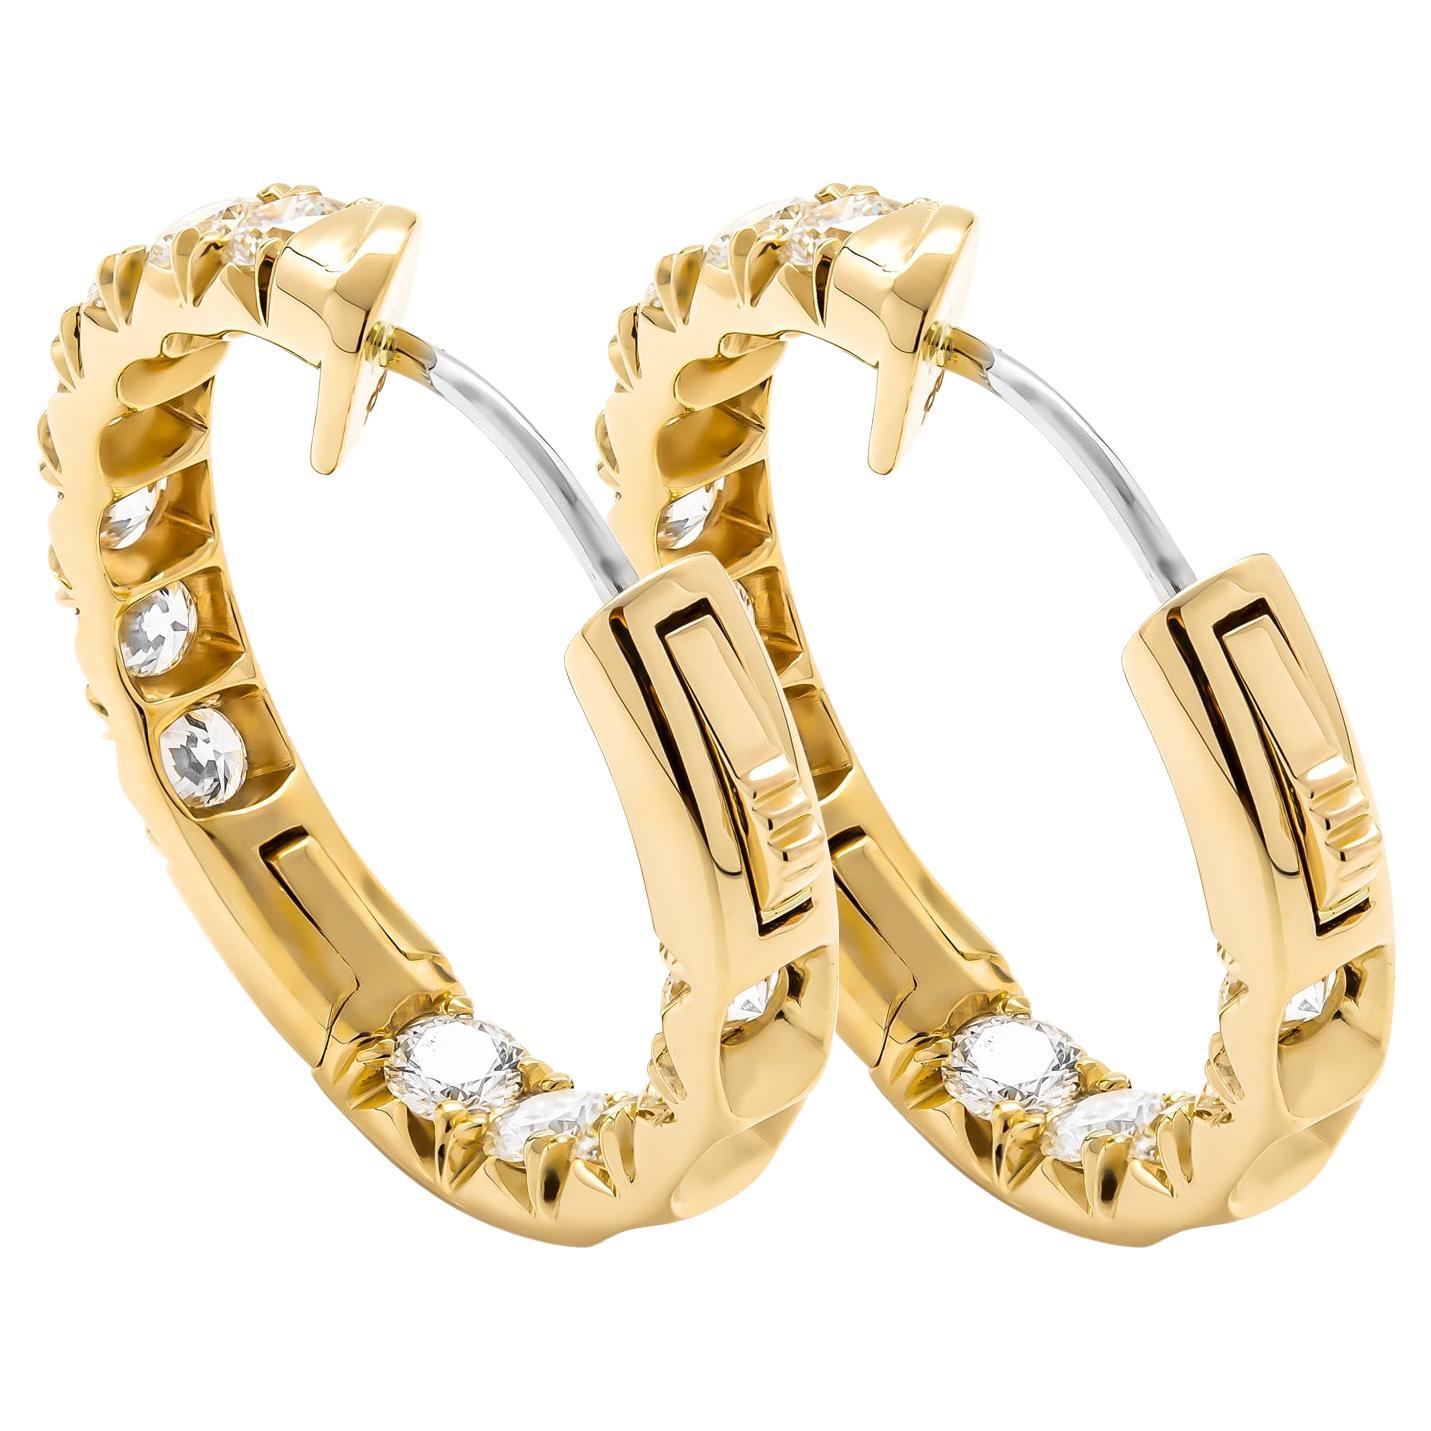 Diamond Hoop Earrings in 18K Yellow Gold 
With 24 white diamond 3.6mm each stone D/E/F color and VS clarity, totaling 4.7ct 
Hoop diameter: 24mm
Thickness: 4.8mm 
Comes in box, appraisal available upon request 
Retail: 20,000$